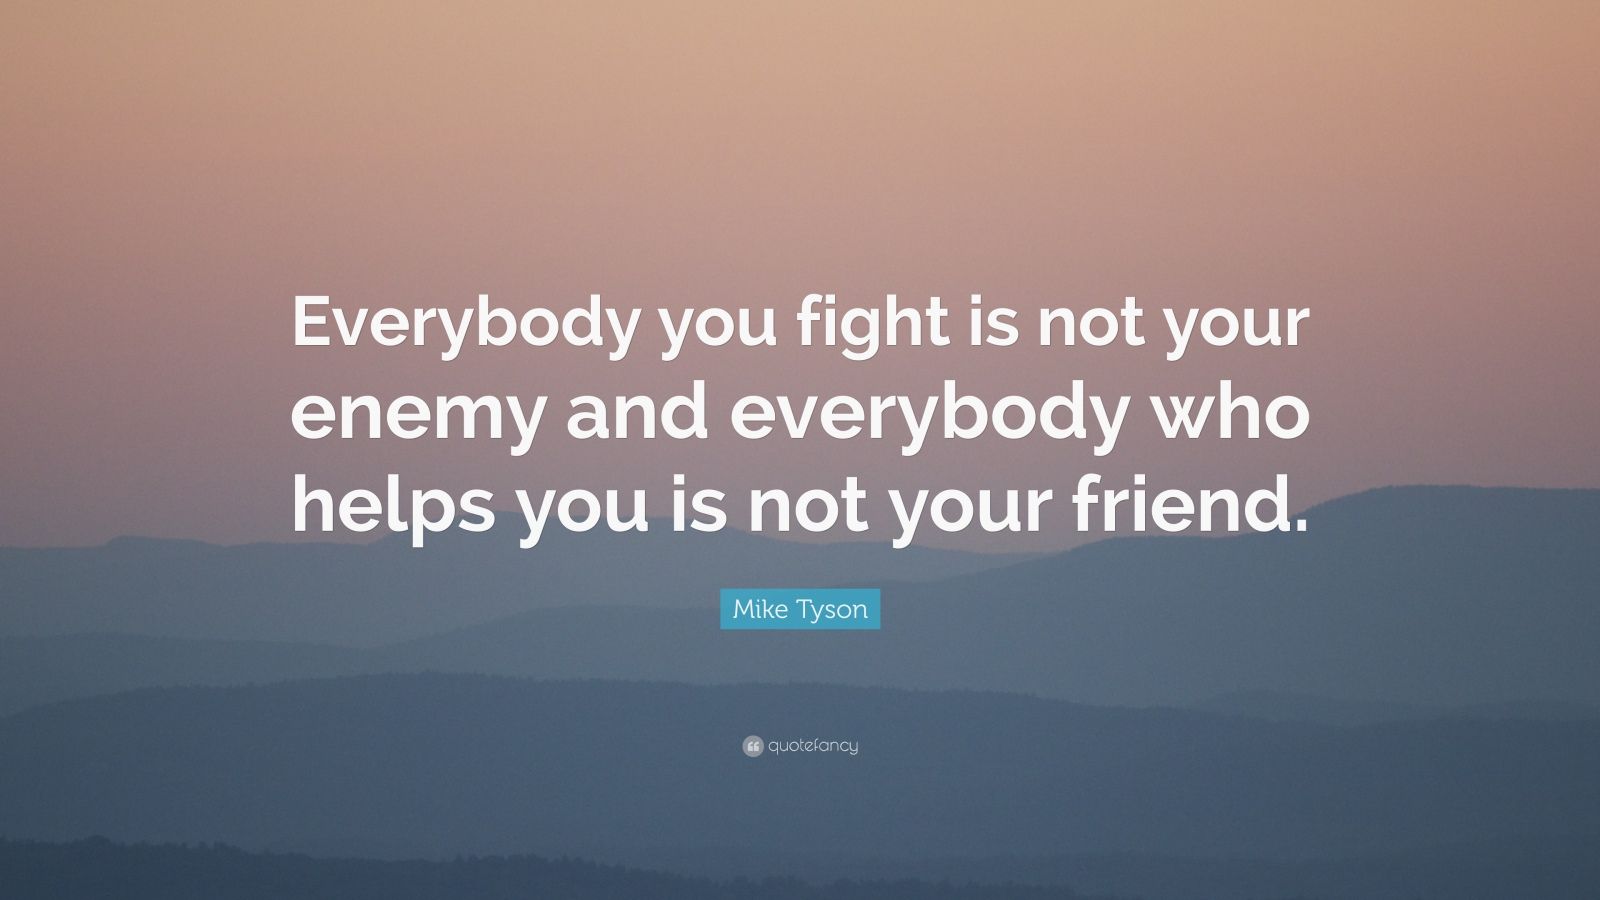 Mike Tyson Quote: “Everybody you fight is not your enemy and everybody who helps you ...1600 x 900